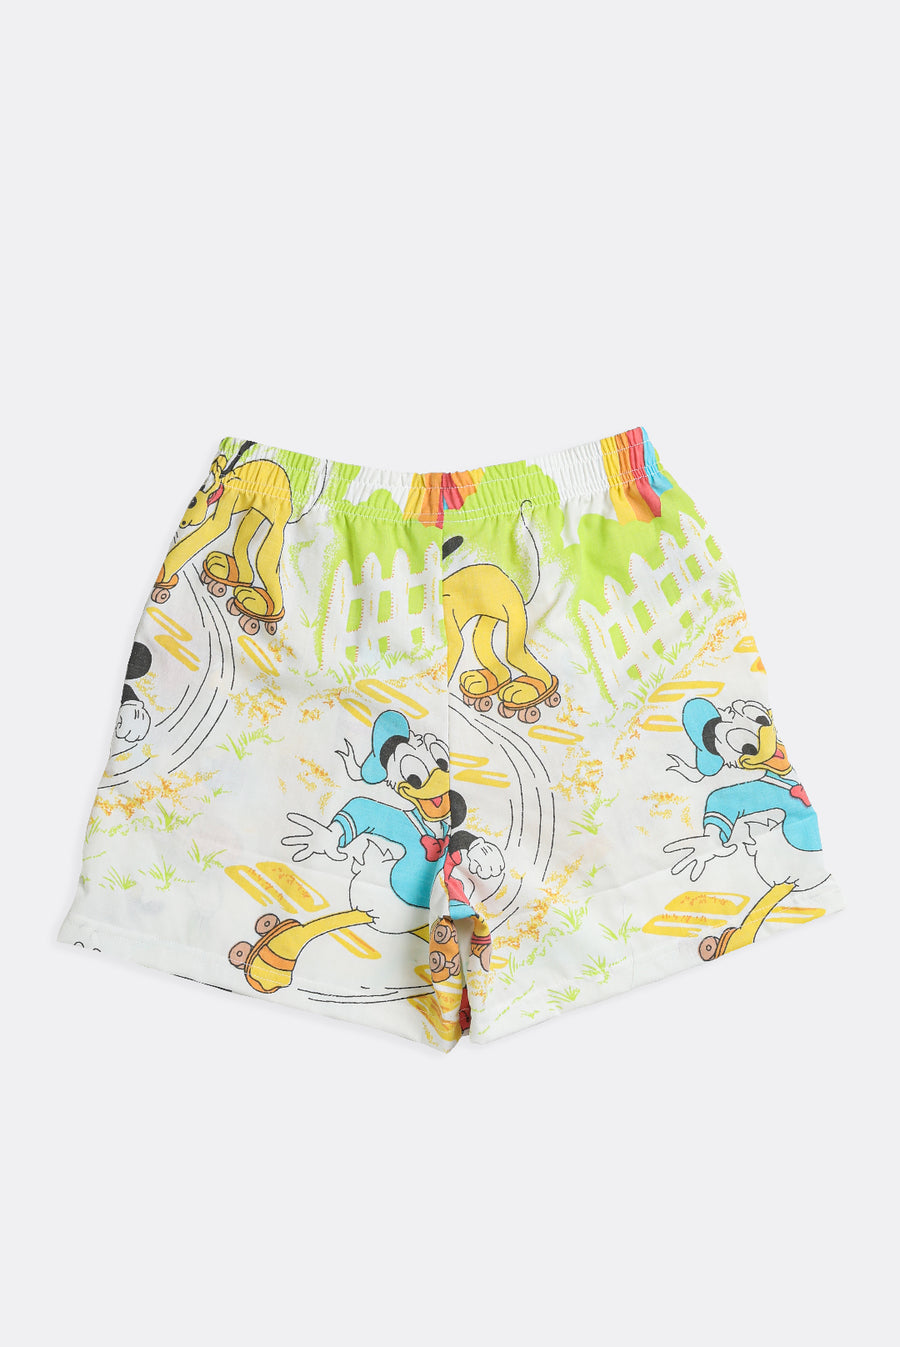 Unisex Rework Mickey Mouse and Friends Boxer Shorts - S